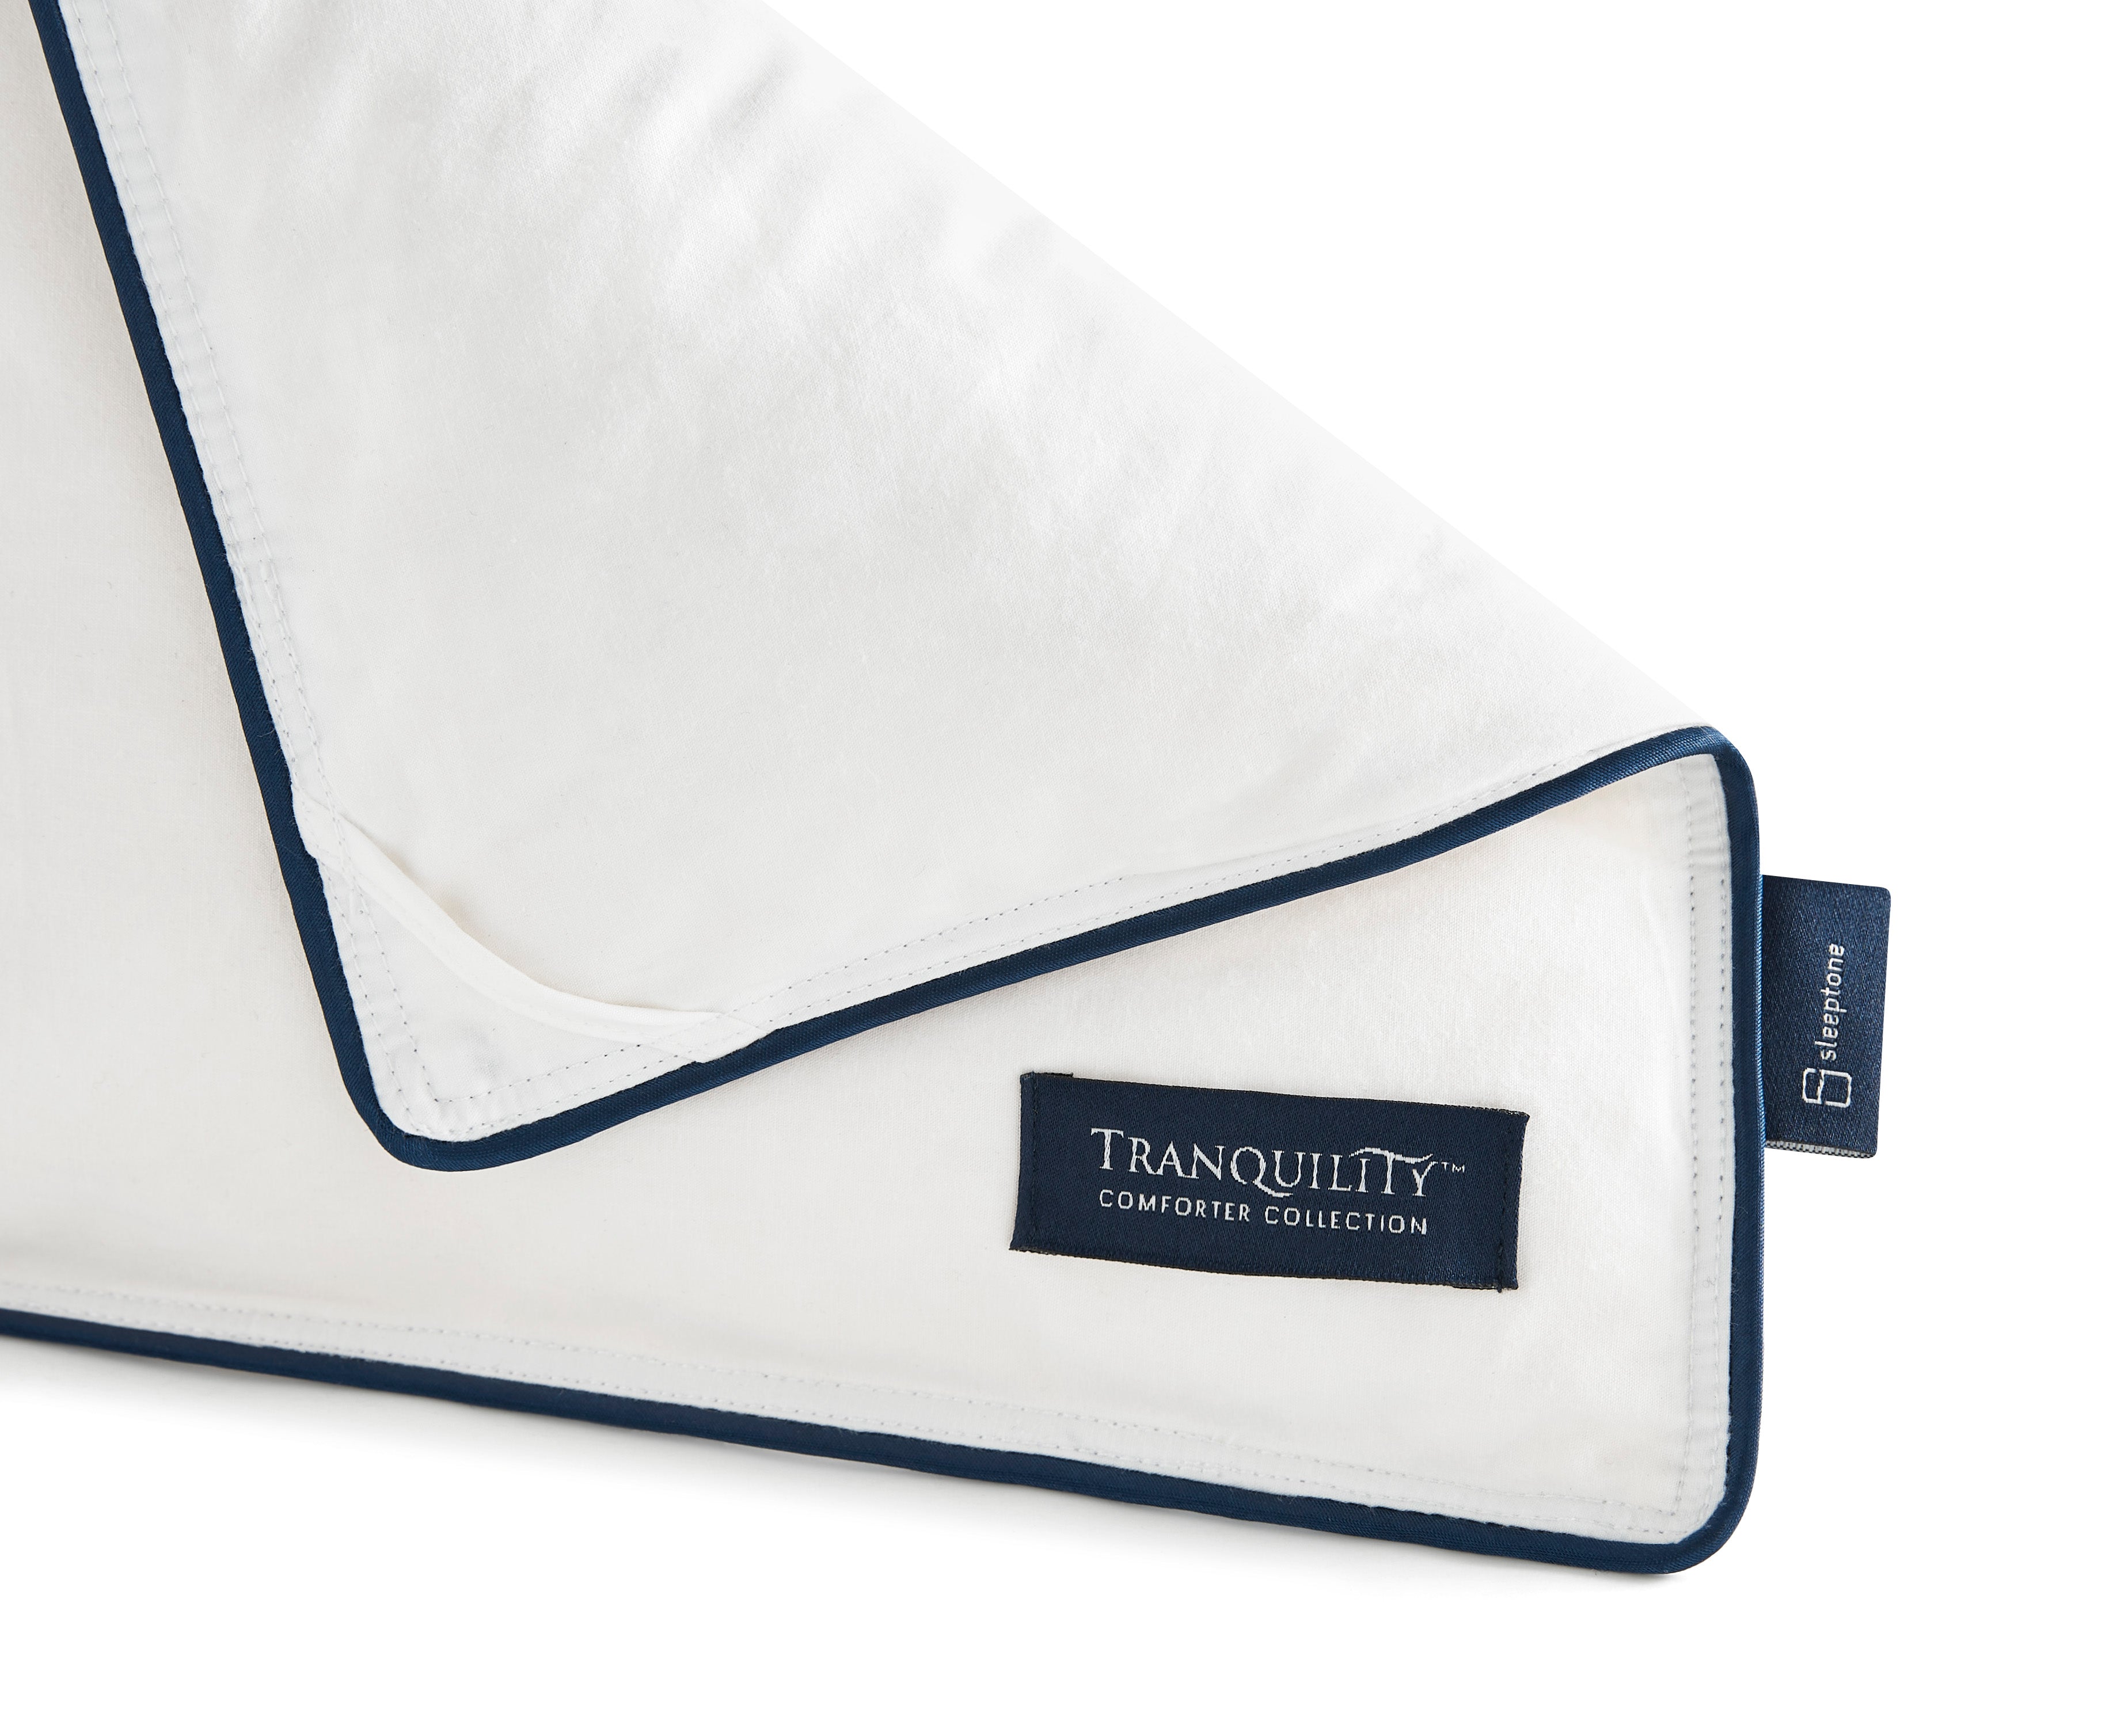 Sleeptone Mini Tranquility Feather and Down Comforter - POP Comforter